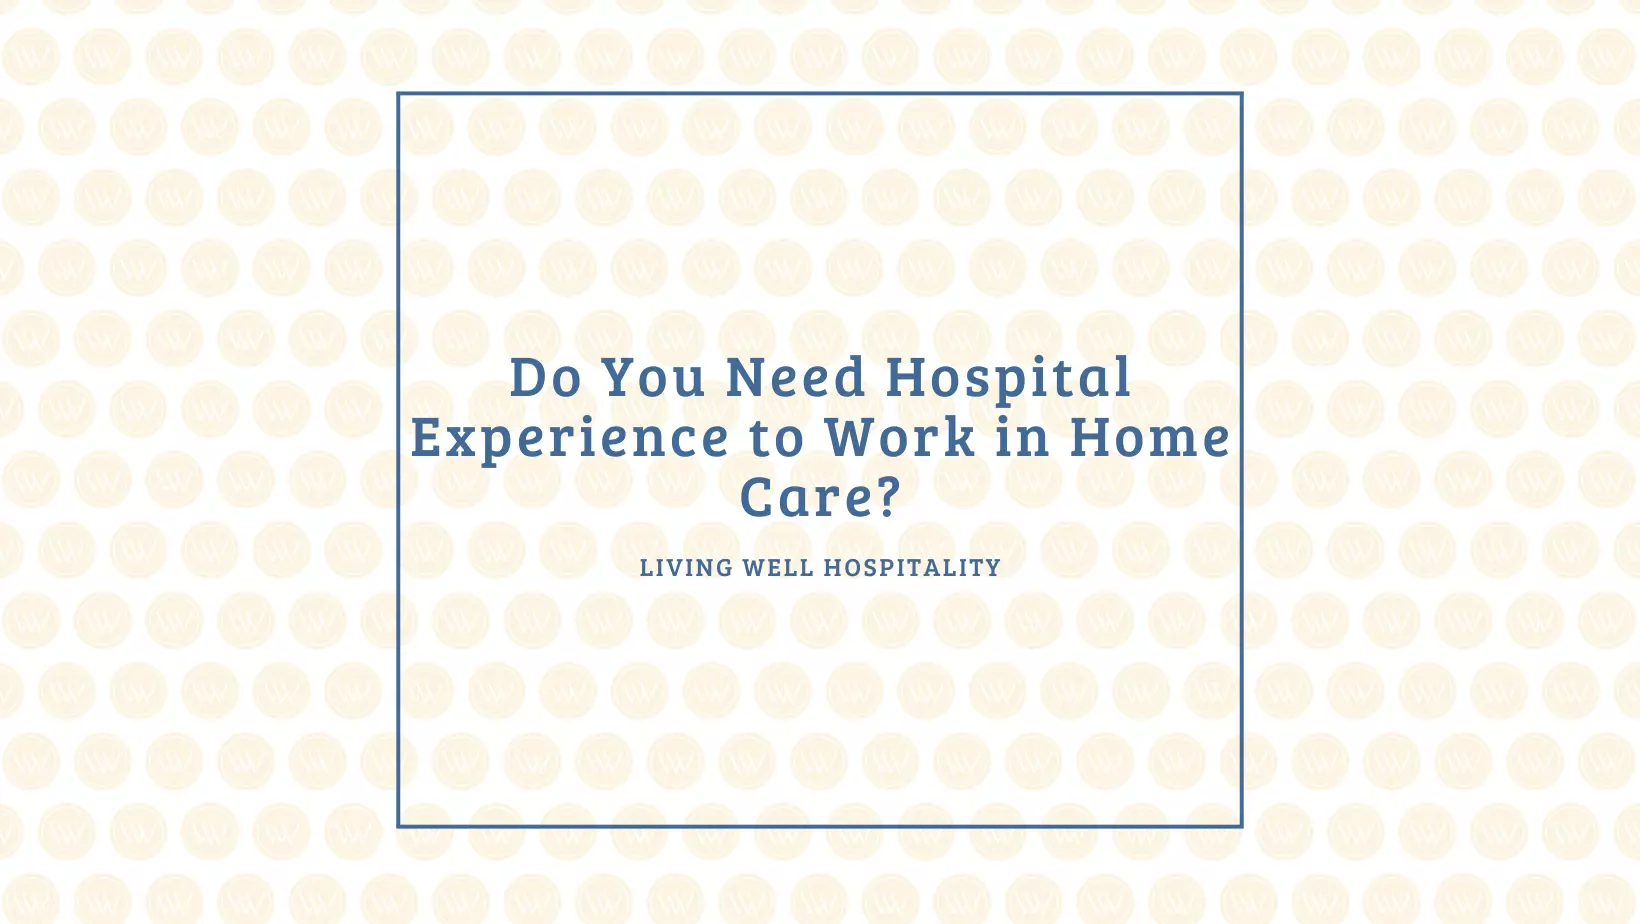 Do You Need Hospital Experience to Work in Home Care